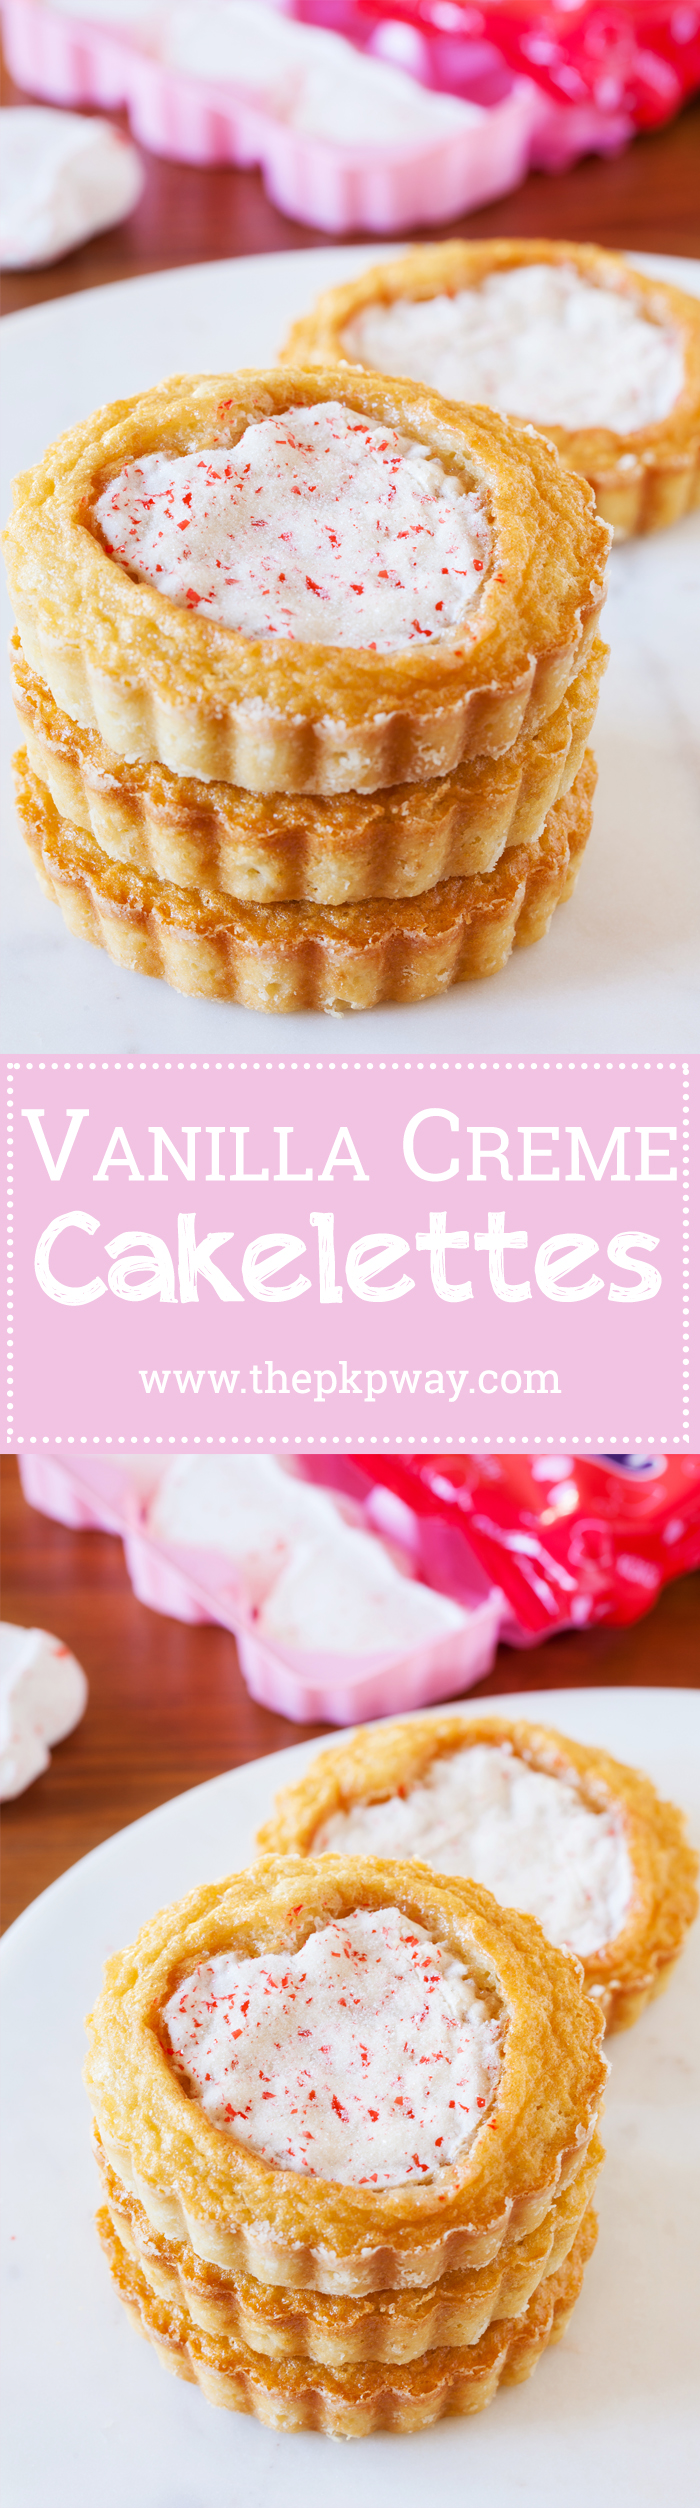 Vanilla Creme Cakelettes ~ Soft and moist individual cakes topped with a PEEPS® heart. No frosting needed!